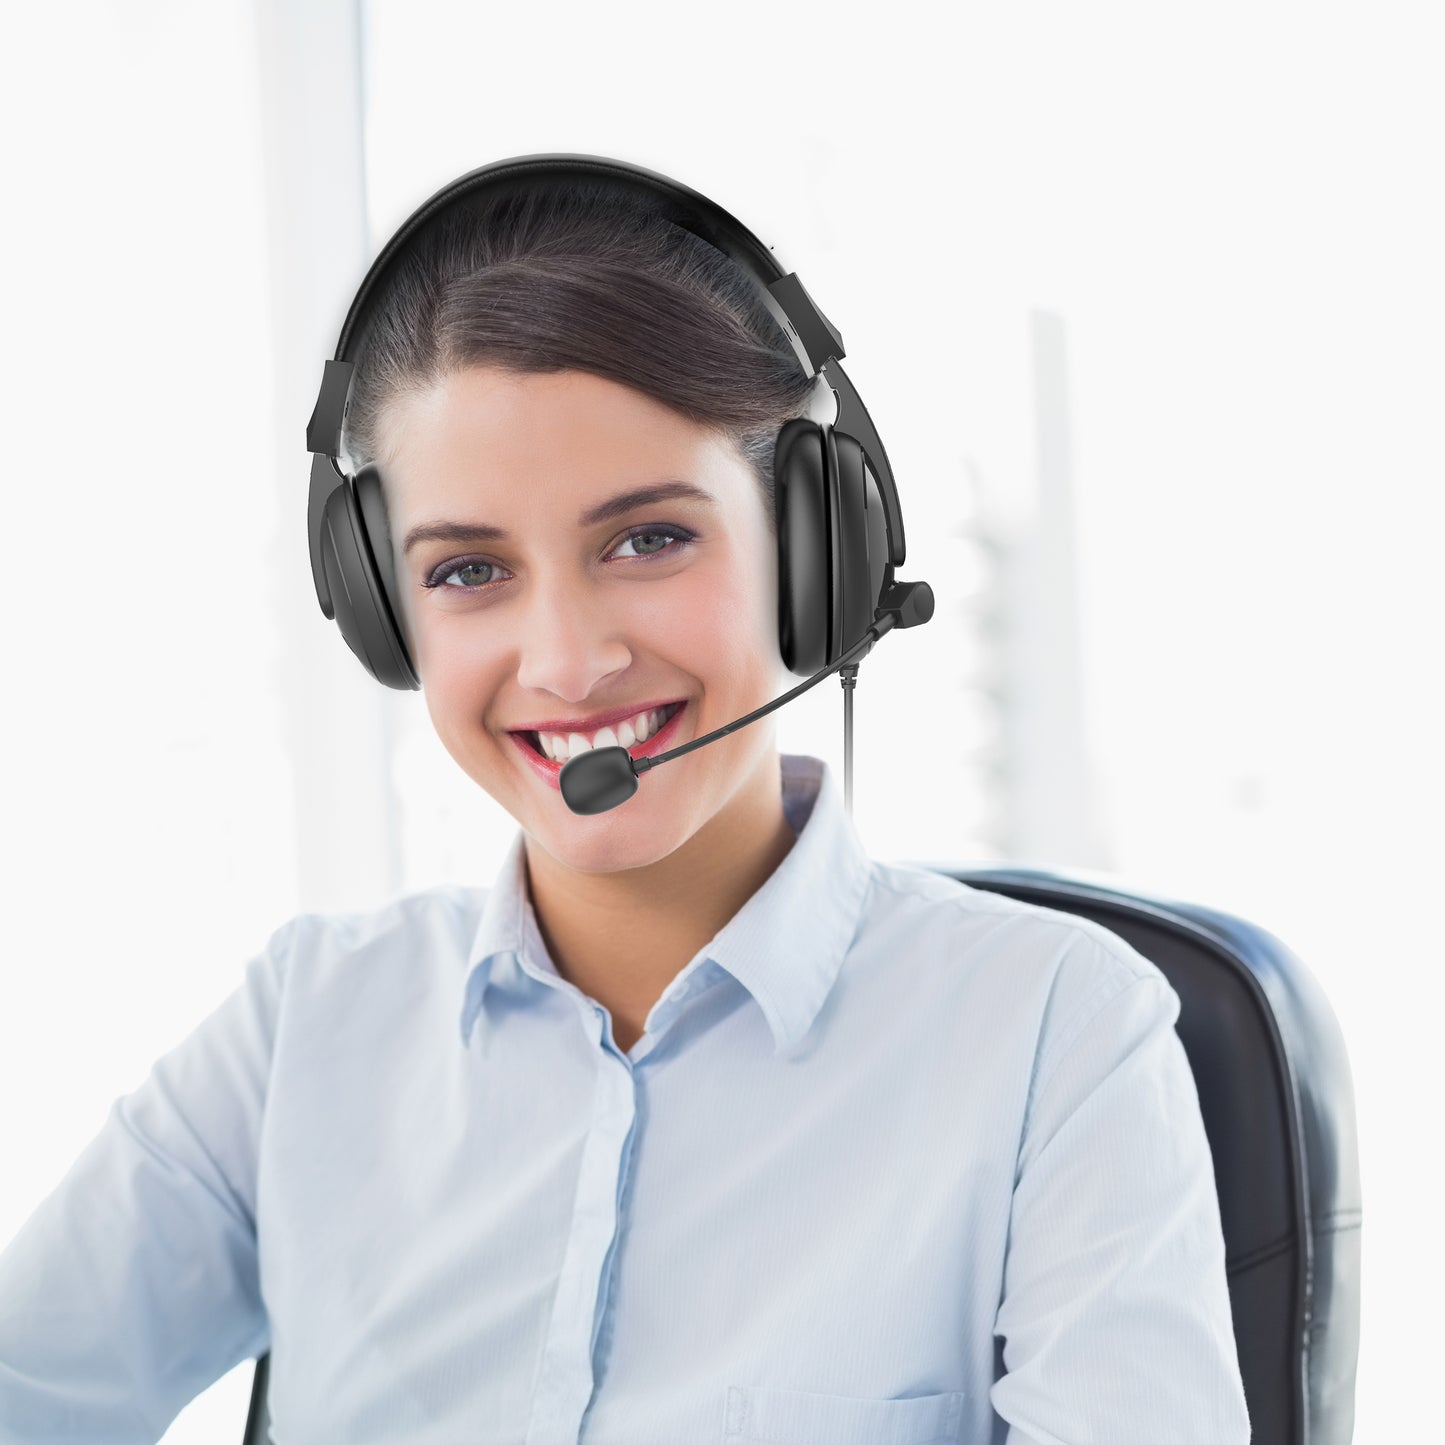 Businesswoman in an office wearing her Basic MM Headset with Boom Microphone and speaking to a customer.